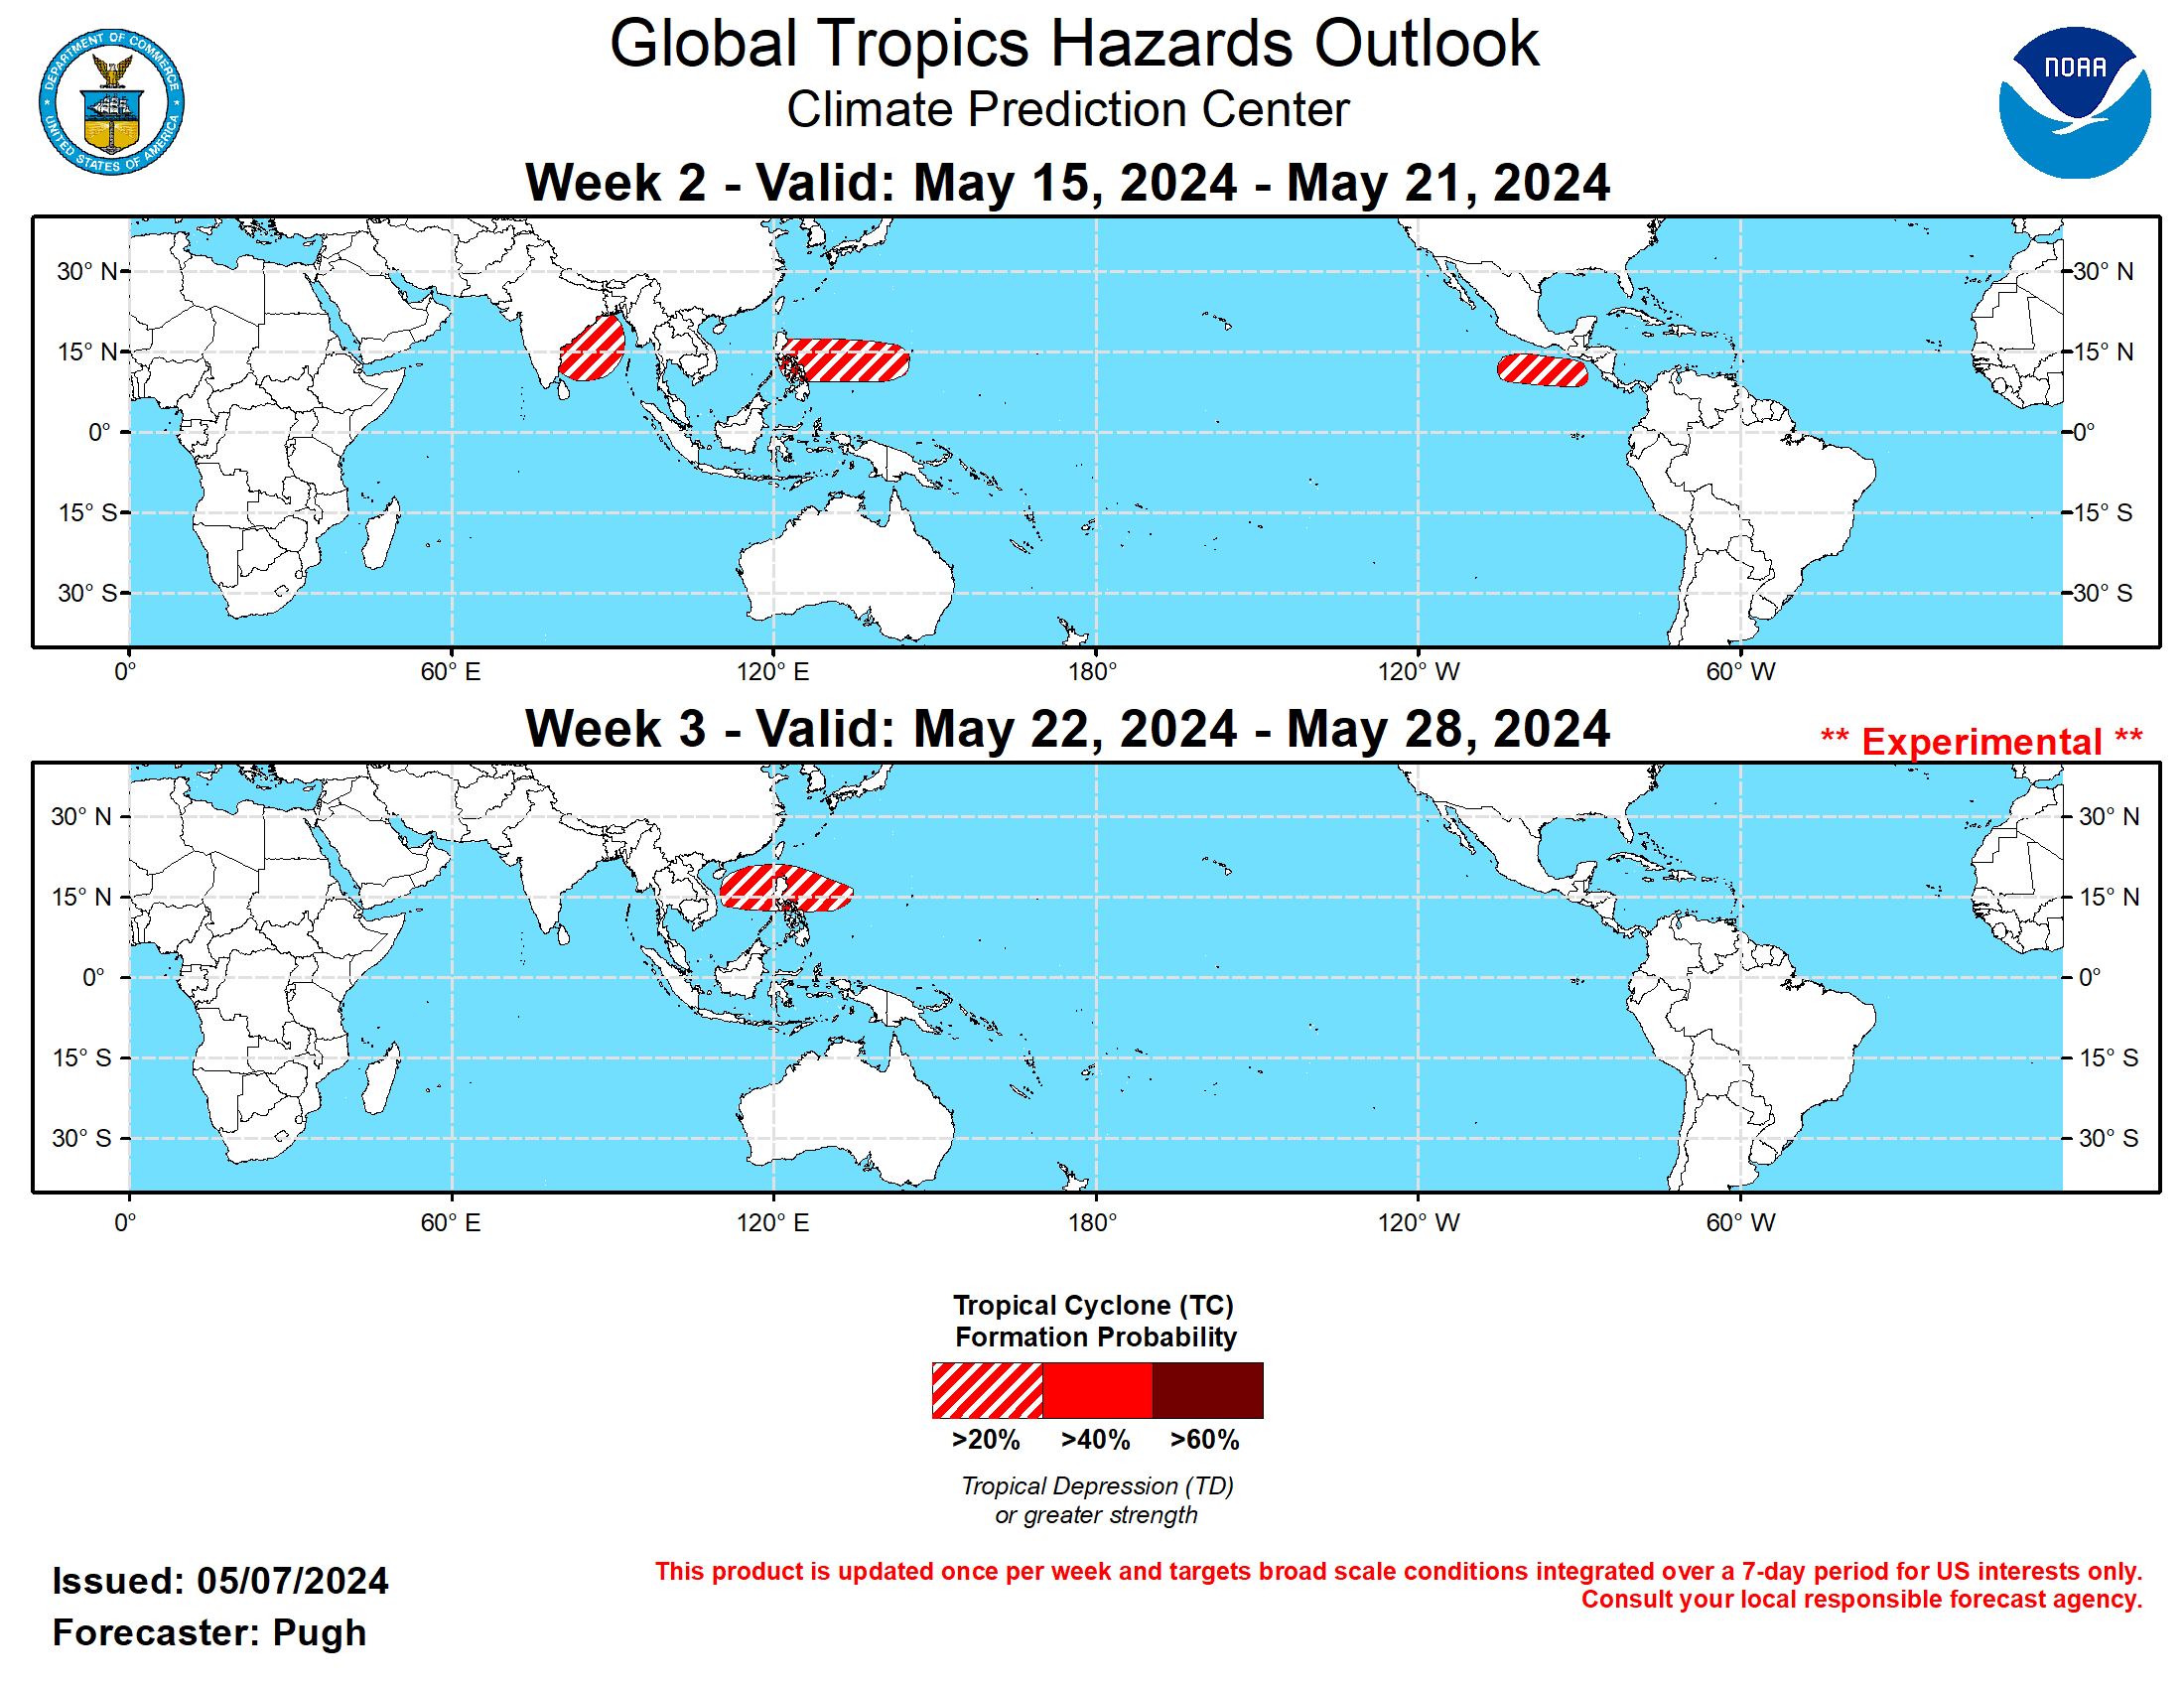 GTH Outlook Discussion Last Updated - 05/07/24 Valid - 05/15/24 - 05/28/24 According to the RMM-based MJO index, the MJO amplitude increased during late April with recent eastward propagation from the Indian Ocean to the Maritime Continent. The observed 200-hPa velocity potential anomaly field depicts a coherent wave-1 pattern with anomalous divergence (convergence) centered over the Maritime Continent and West Pacific (Atlantic). This spatial pattern of 200-hPa velocity potential anomalies has also shown an eastward propagation during the past week which is consistent with an MJO. The GEFS and ECMWF models generally agree on an MJO propagating rapidly east over the Western Hemisphere during the next two weeks. Also, there is expected to be a Kelvin wave out ahead of this MJO and an equatorial Rossby wave shifting west from the Pacific to the Indian Ocean during mid-May. The multiple modes of subseasonal variability are complicating the RMM-based index forecast from the dynamical models.  Following a few weeks of no tropical cyclones (TCs) over the southern Indian Ocean, the recent strengthening MJO may have contributed to the development of Tropical Cyclone Hidaya across the western Indian Ocean on May 1. Heavy rainfall, associated with Hidaya, triggered more flooding across Kenya and Tanzania. During May, the Southern Hemisphere typically becomes much less active with TCs while the West and East Pacific basins begin to ramp up especially later in the month. The large-scale environment across the East Pacific is expected to be briefly favorable for TC development (20 to 40 percent chance) from May 15 to 21, following the passage of the Kelvin wave and MJO. The number of GFS and ECMWF ensemble members featuring TC development in this region has increased the past two days. An equatorial Rossby wave along with dynamical model output supports at least a 20 to percent chance of TC genesis in the Bay of Bengal from May 15 to 21. Based on dynamical models, a 20 to 40 percent chance of TC development is also posted for the West Pacific from May 15 to 21 and this favored area expands to include the South China Sea one week later.